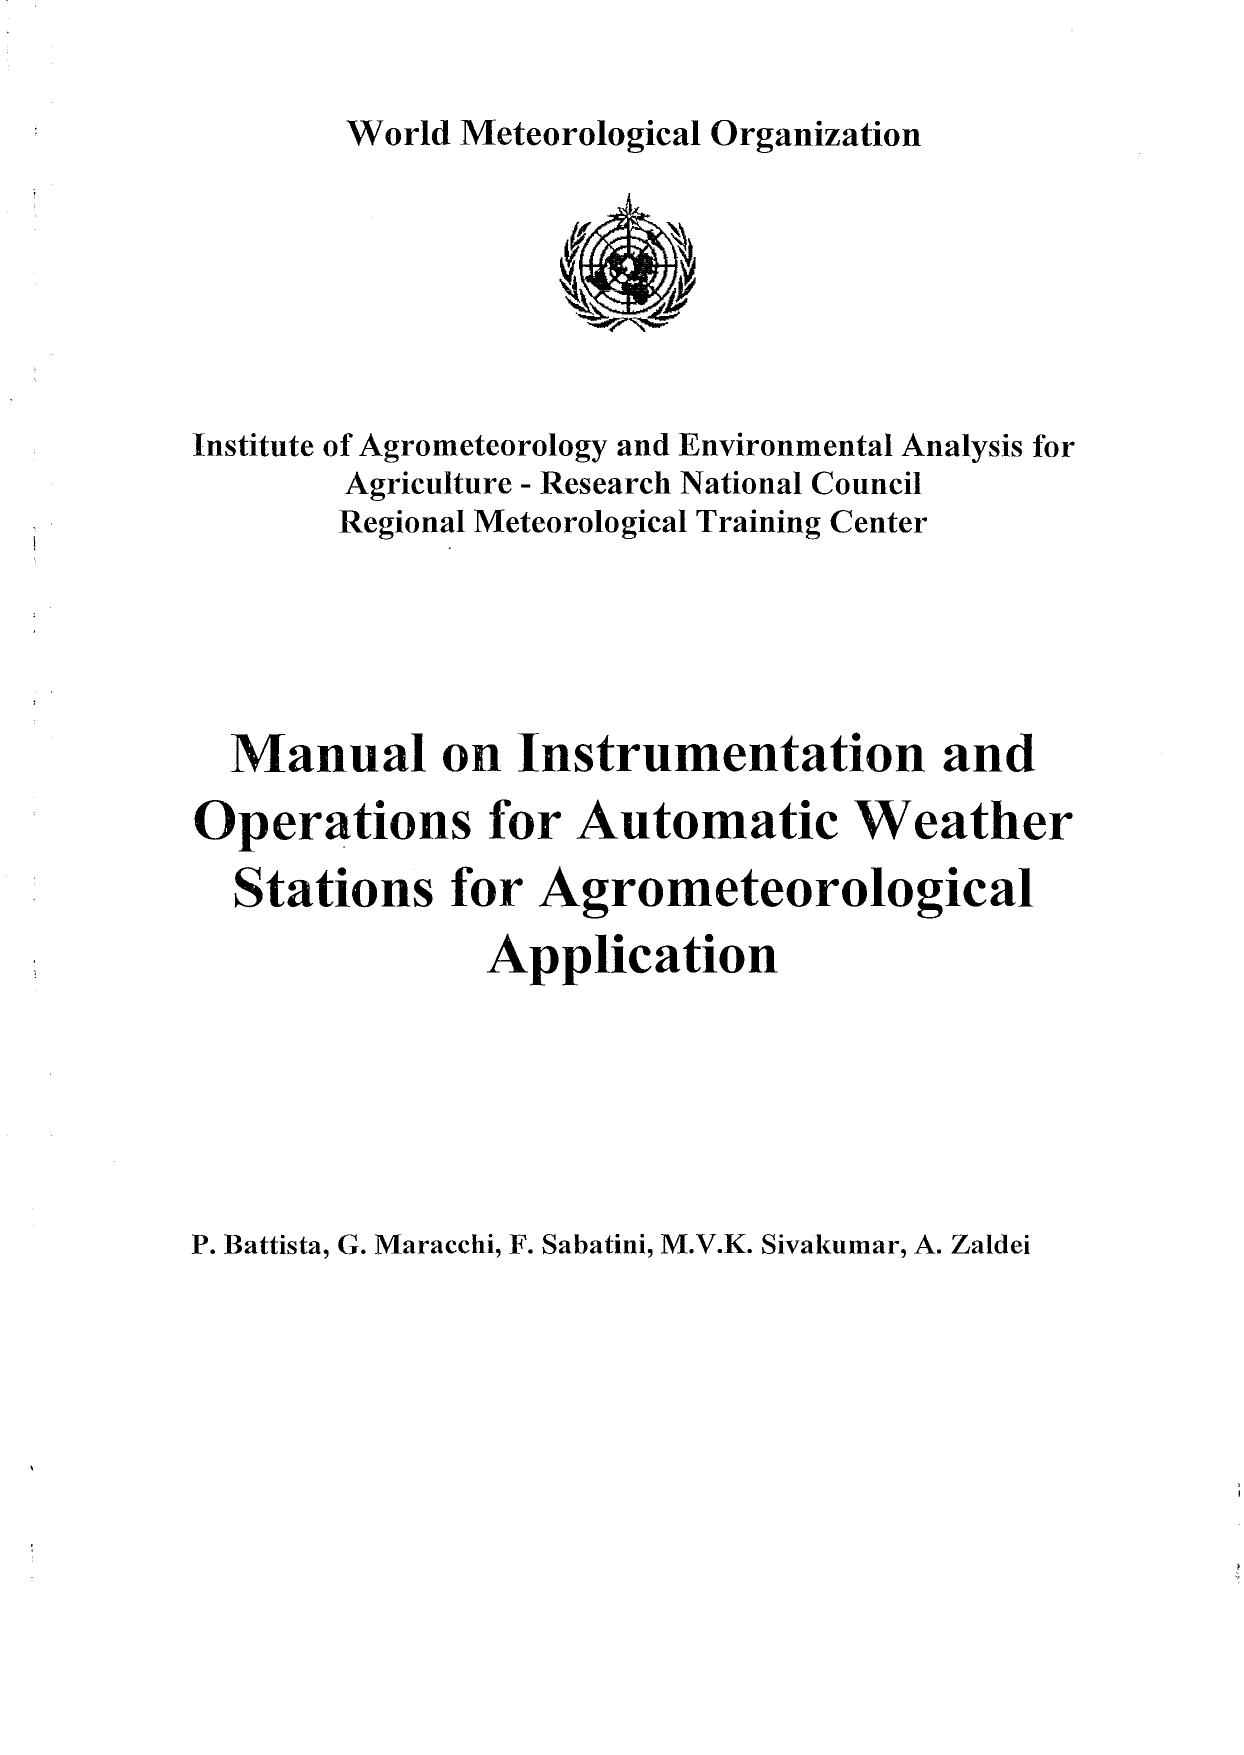 Manual on Instrumentation and Operations for Automatic Weather Stations for Agrometeorological  . 2013